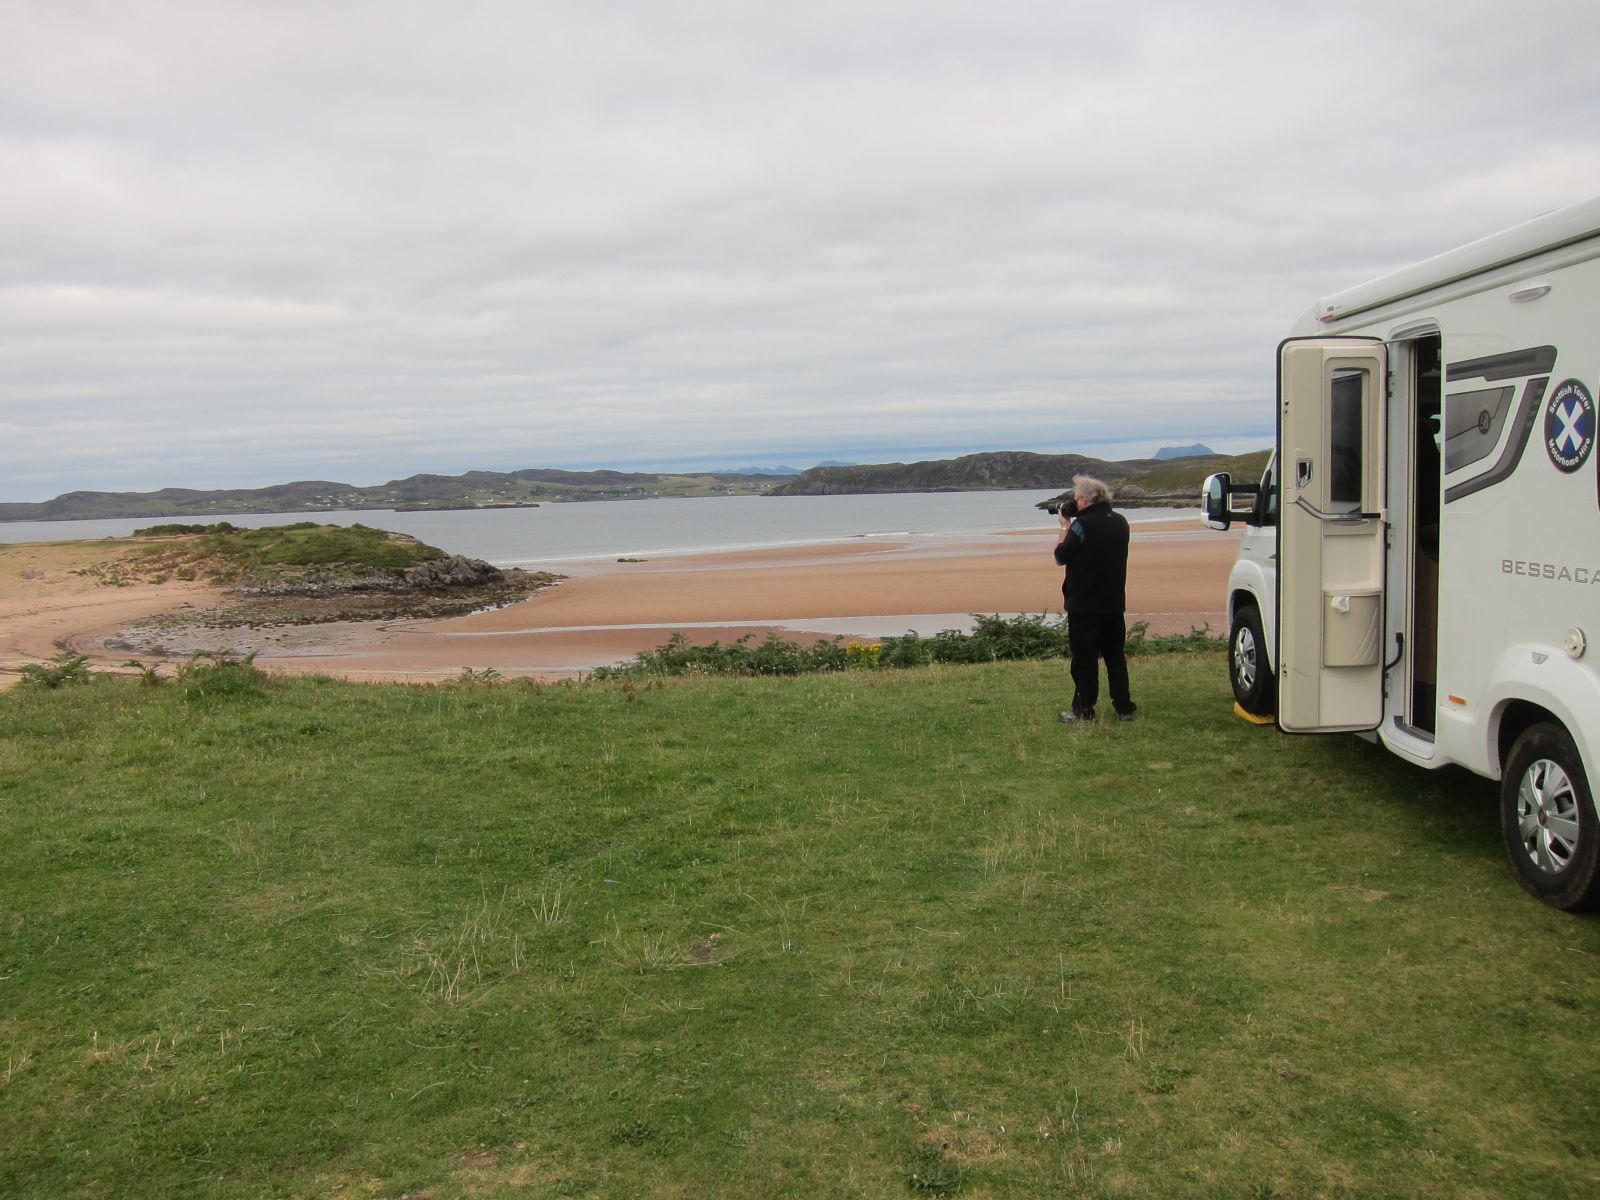 Beach front location wildlife spotting in your motorhome